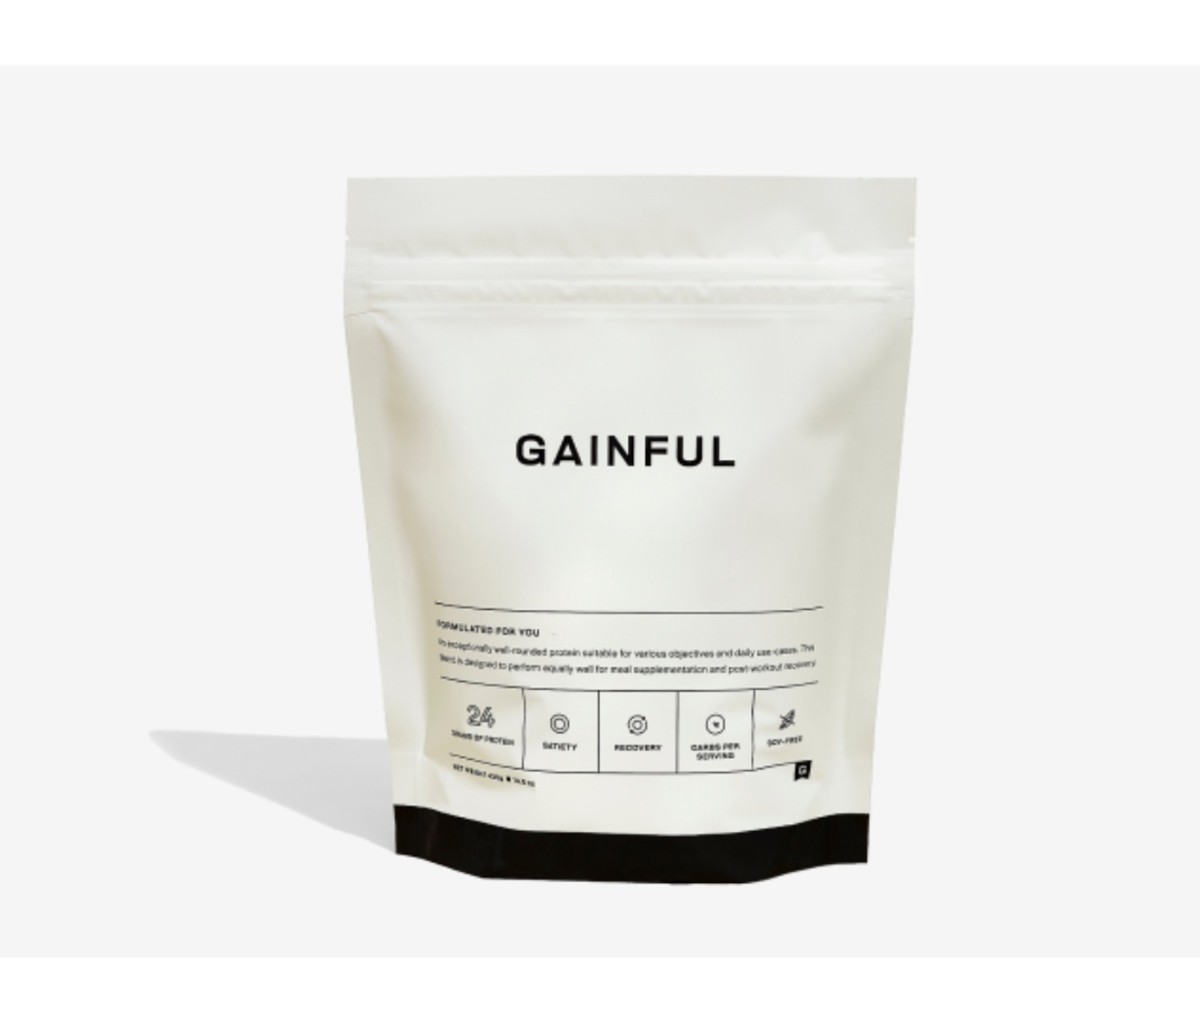 Gainful is one of the best clean protein powder in the market and also a new wave of customized protein powders based on your unique goals, body composition, and lifestyle.